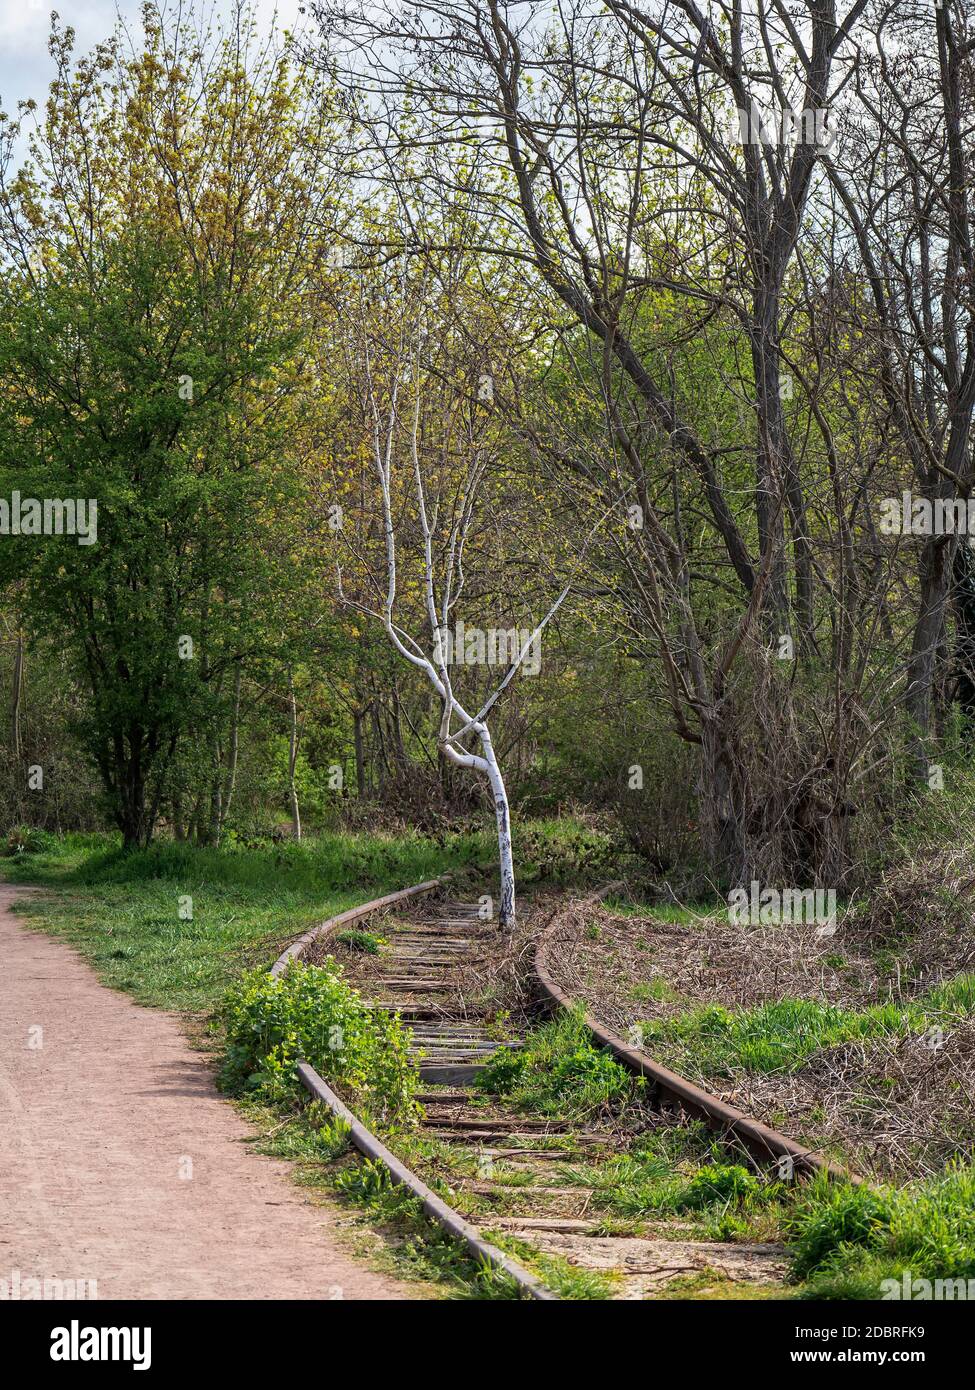 Adult rails with trees Stock Photo